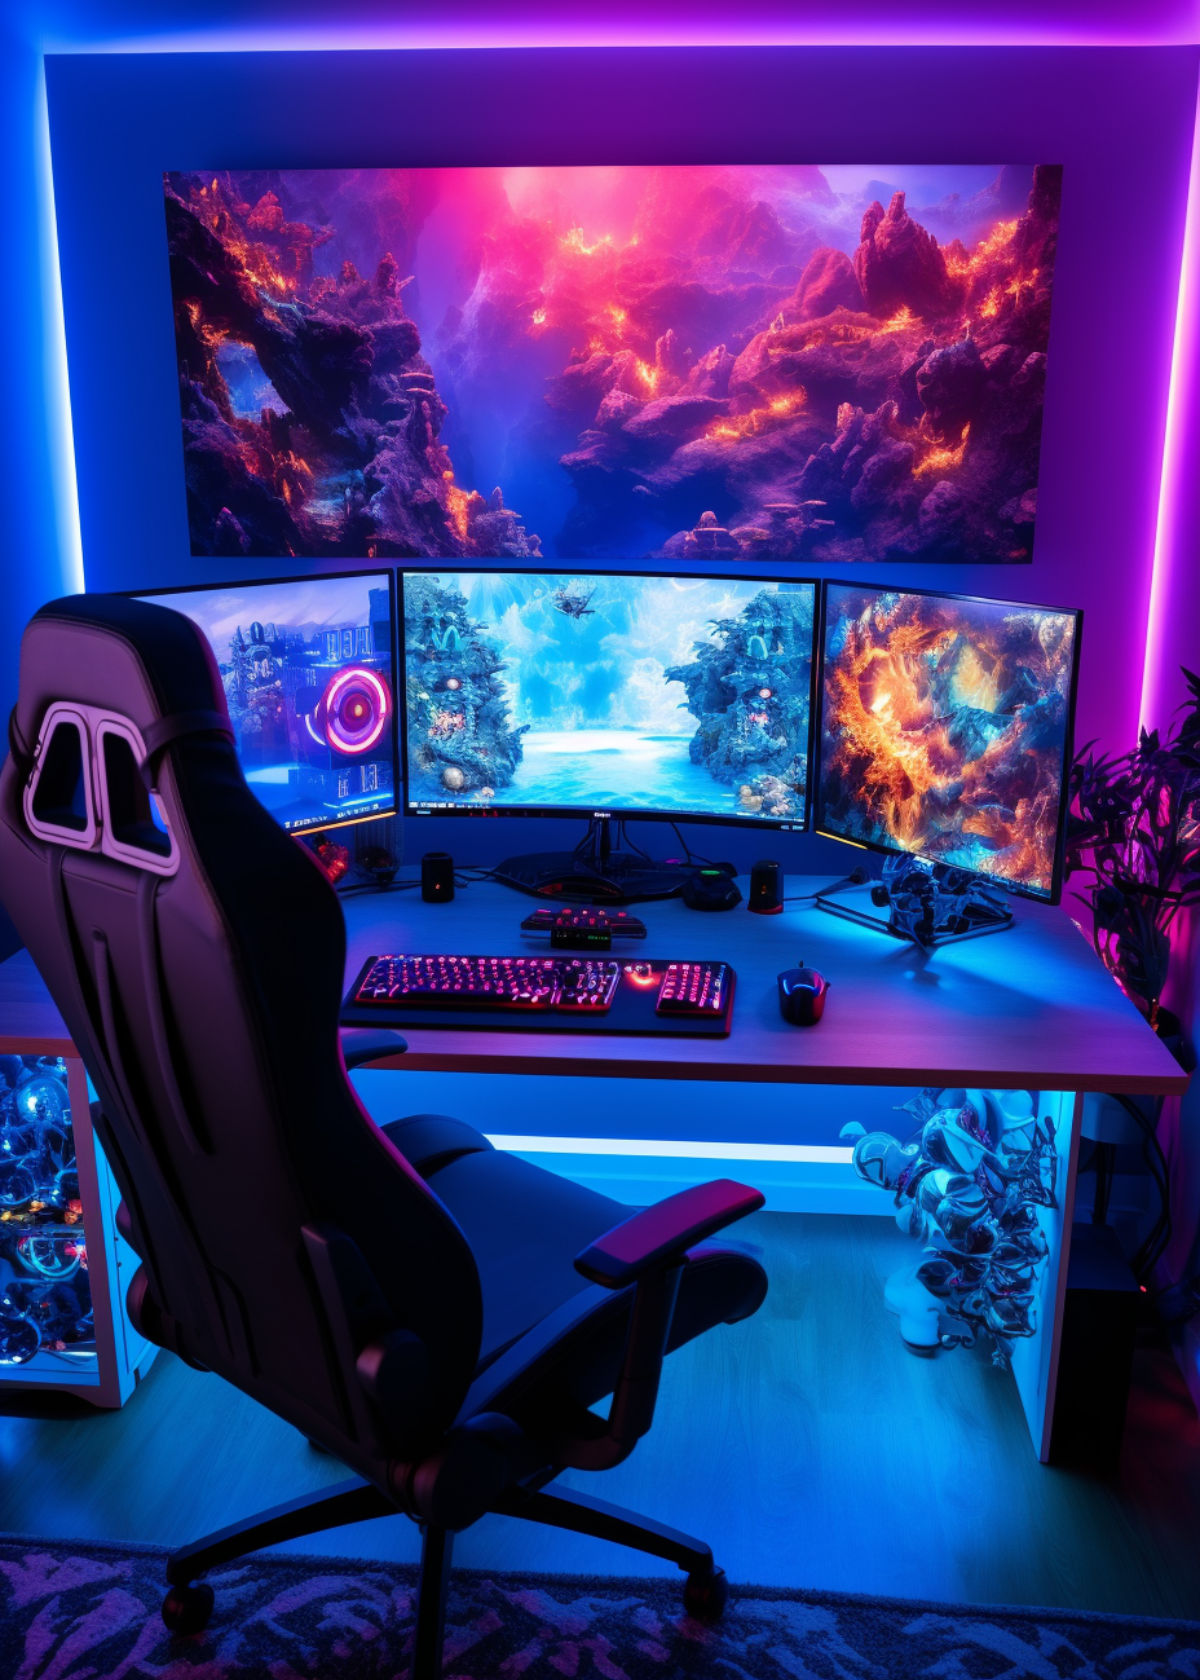 How Much Does a Good Gaming Setup Cost?